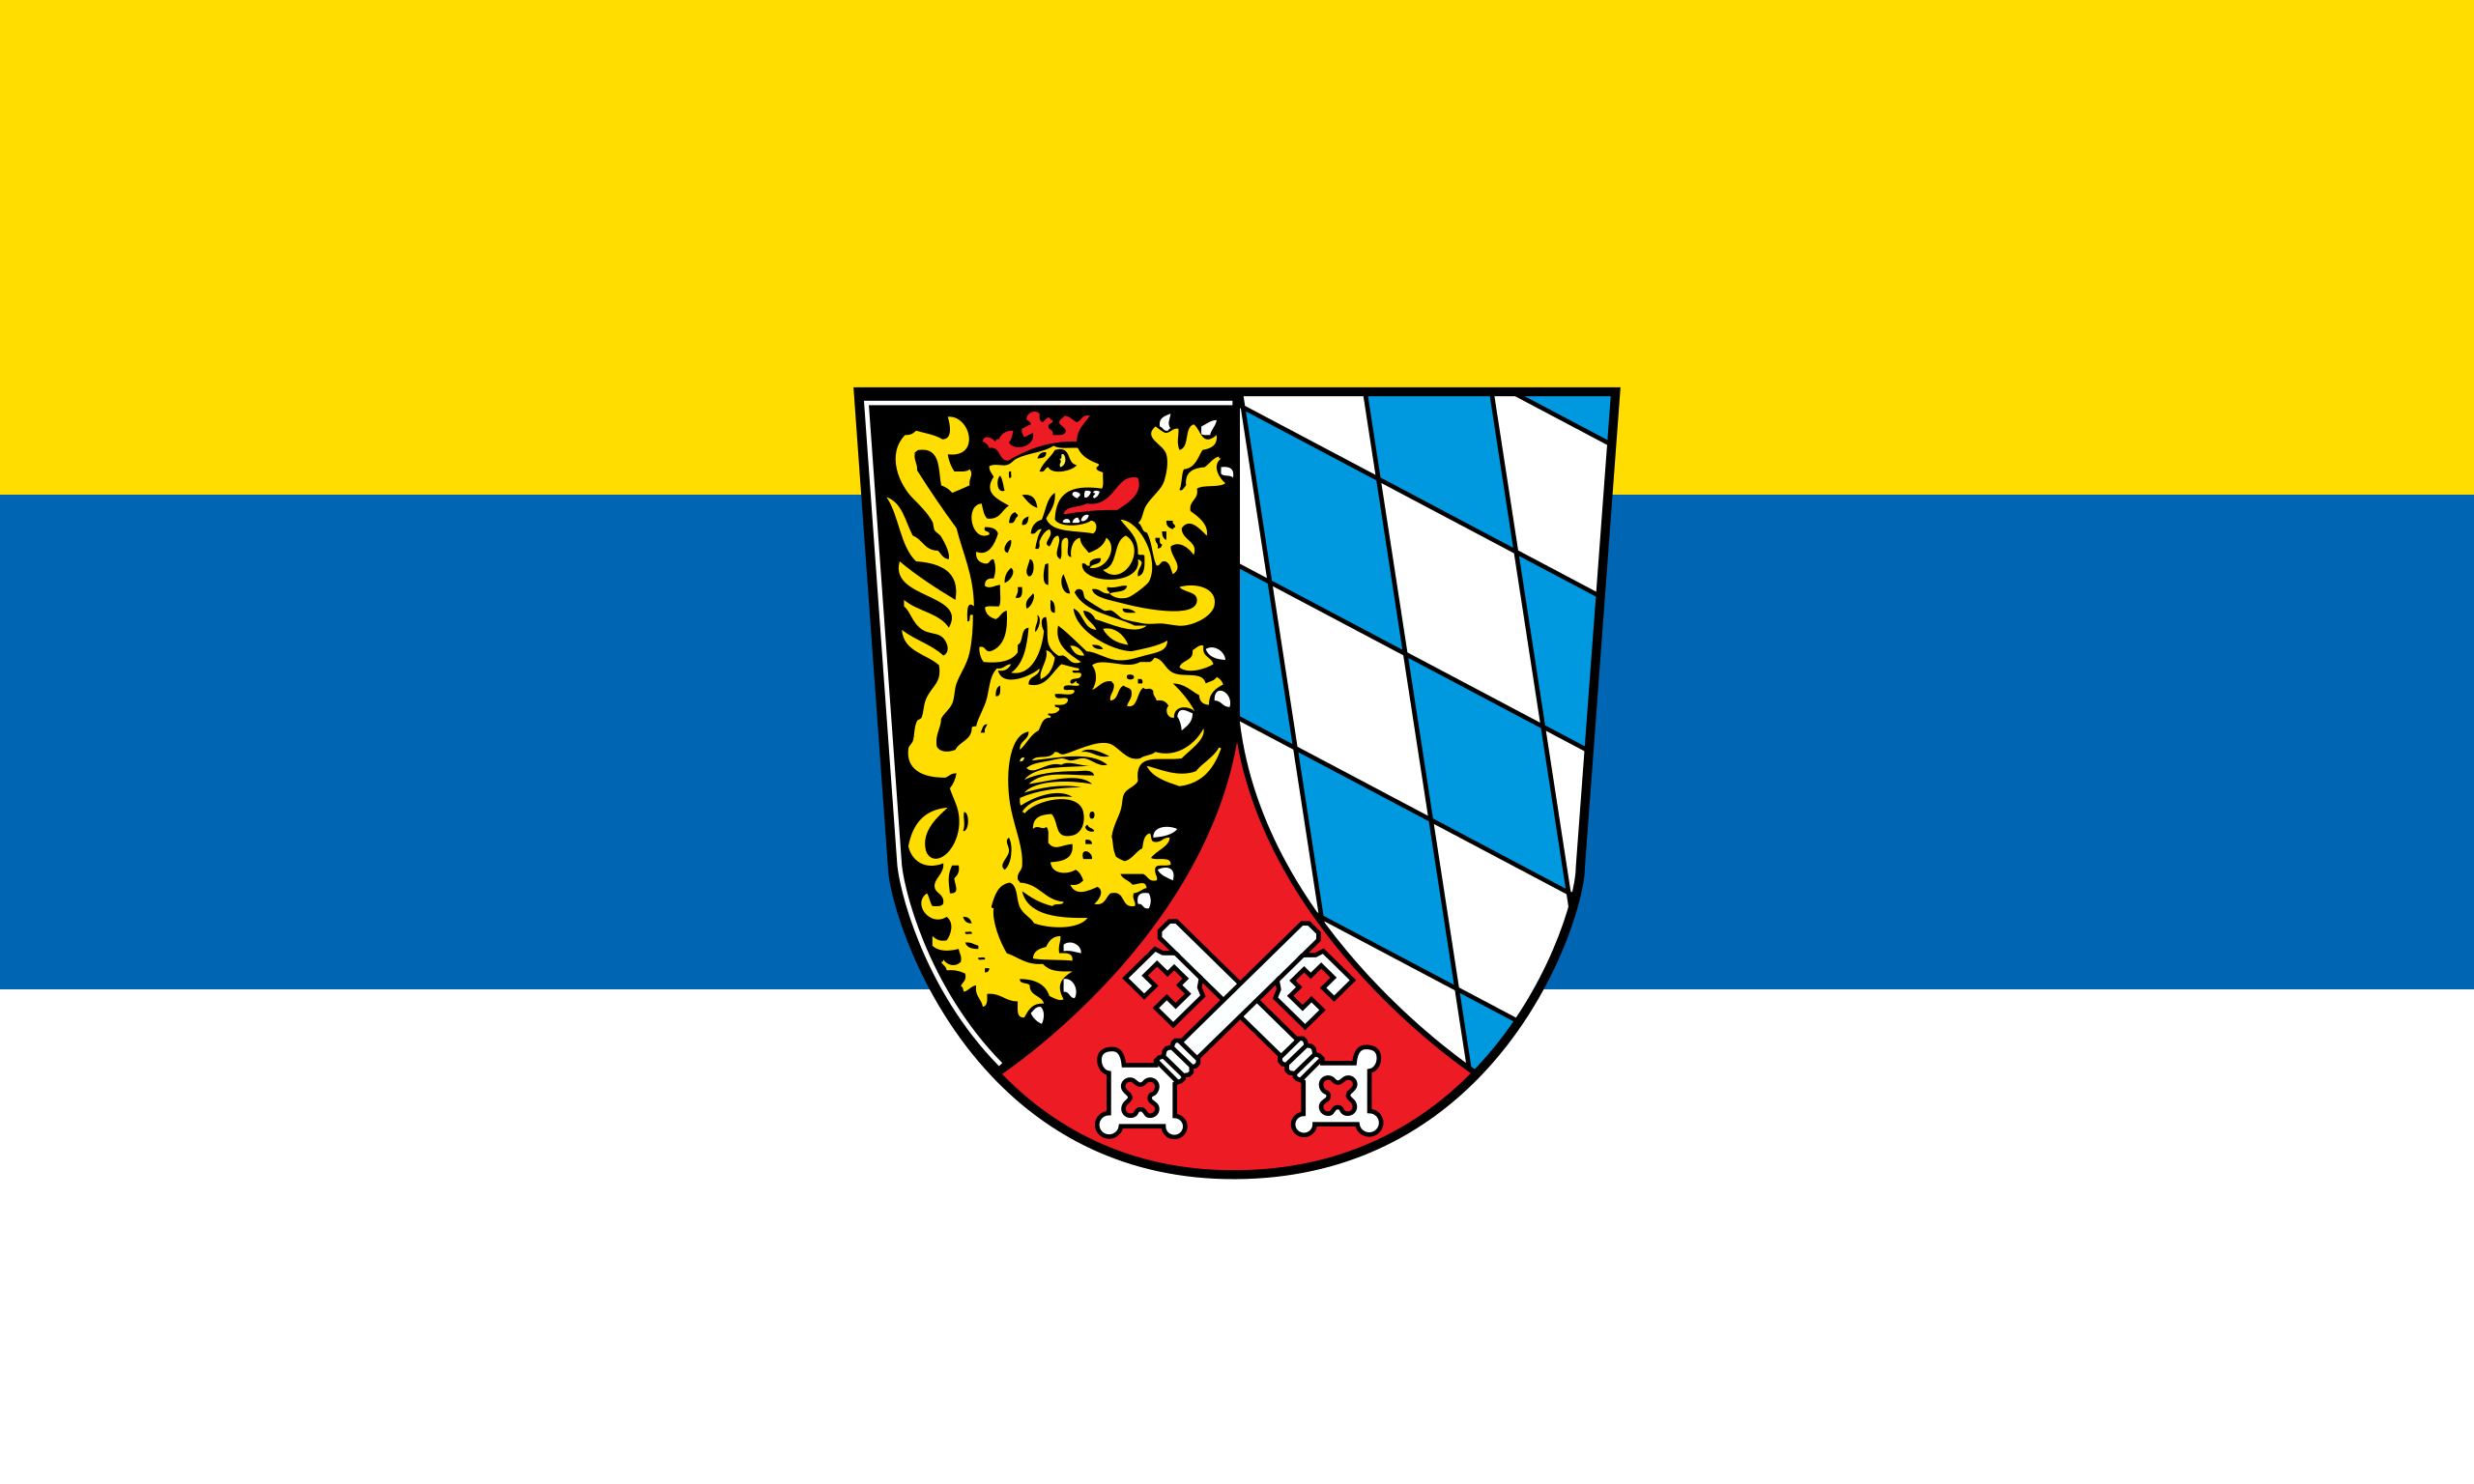 https://upload.wikimedia.org/wikipedia/commons/thumb/d/d3/Flagge_Oberpfalz.svg/2560px-Flagge_Oberpfalz.svg.png